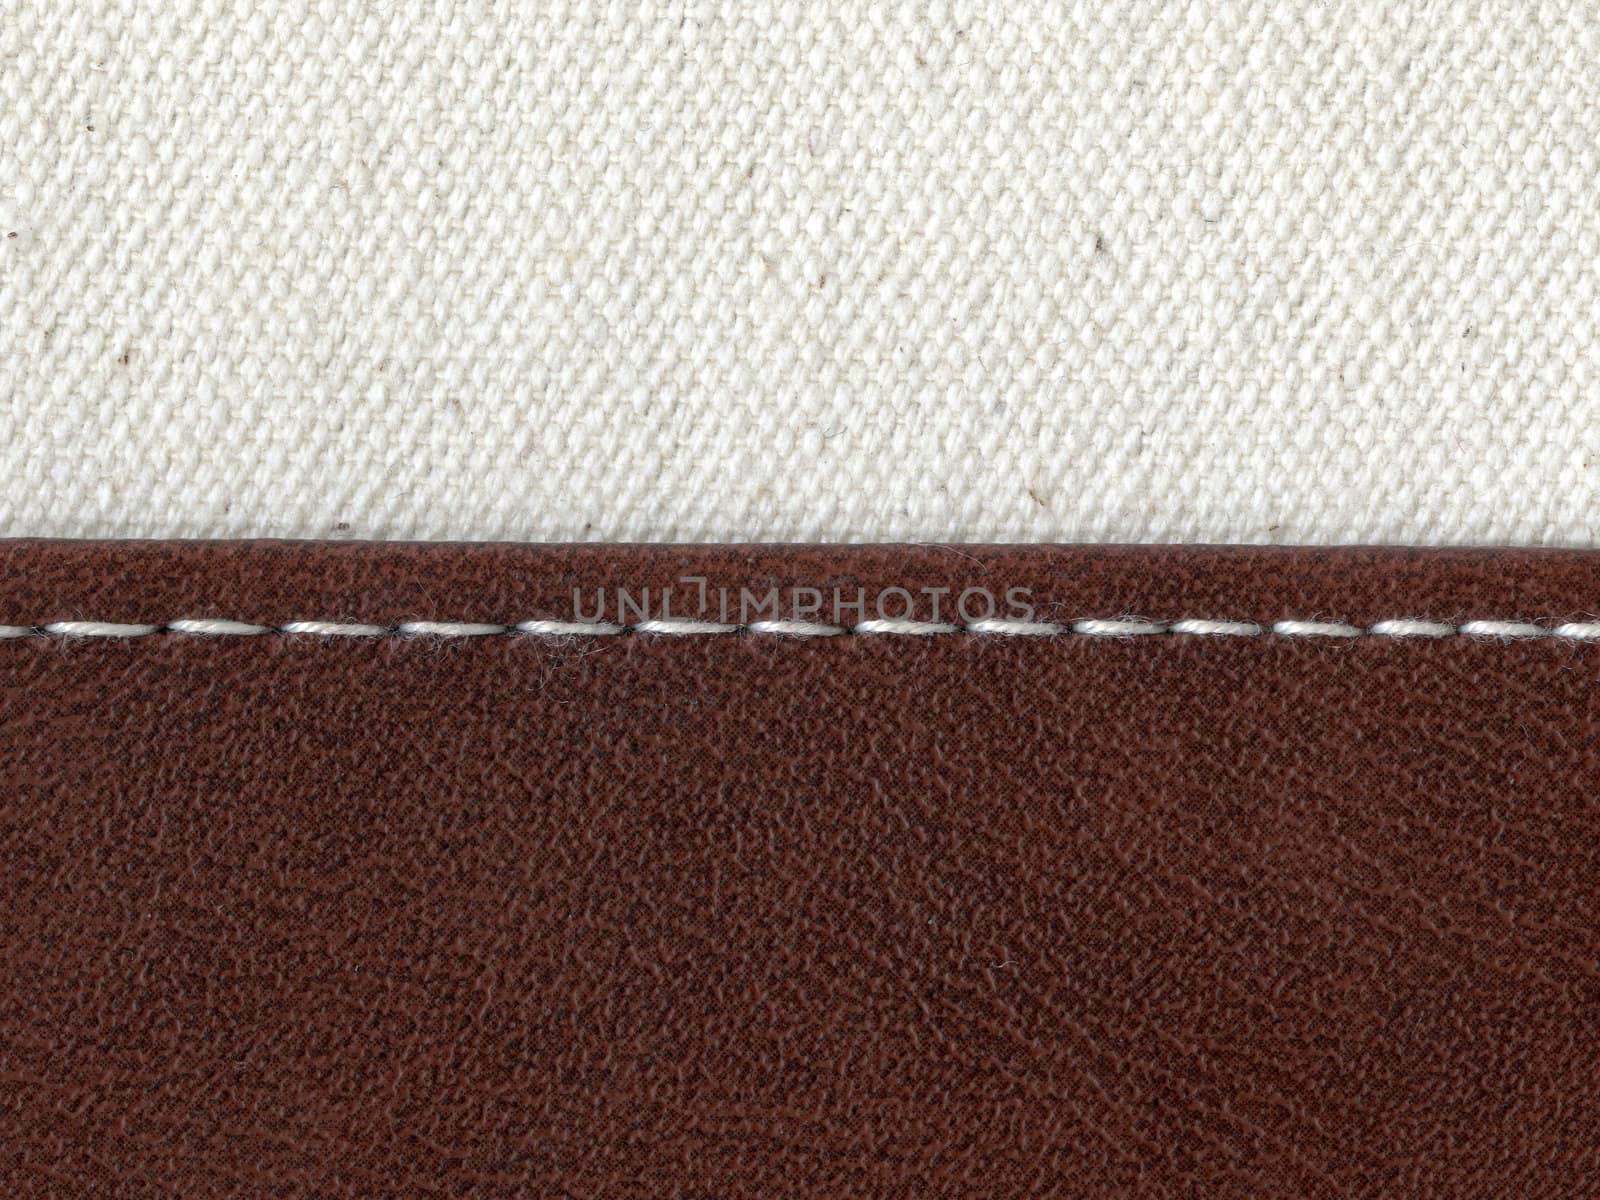 two textile materials jointed by white thread